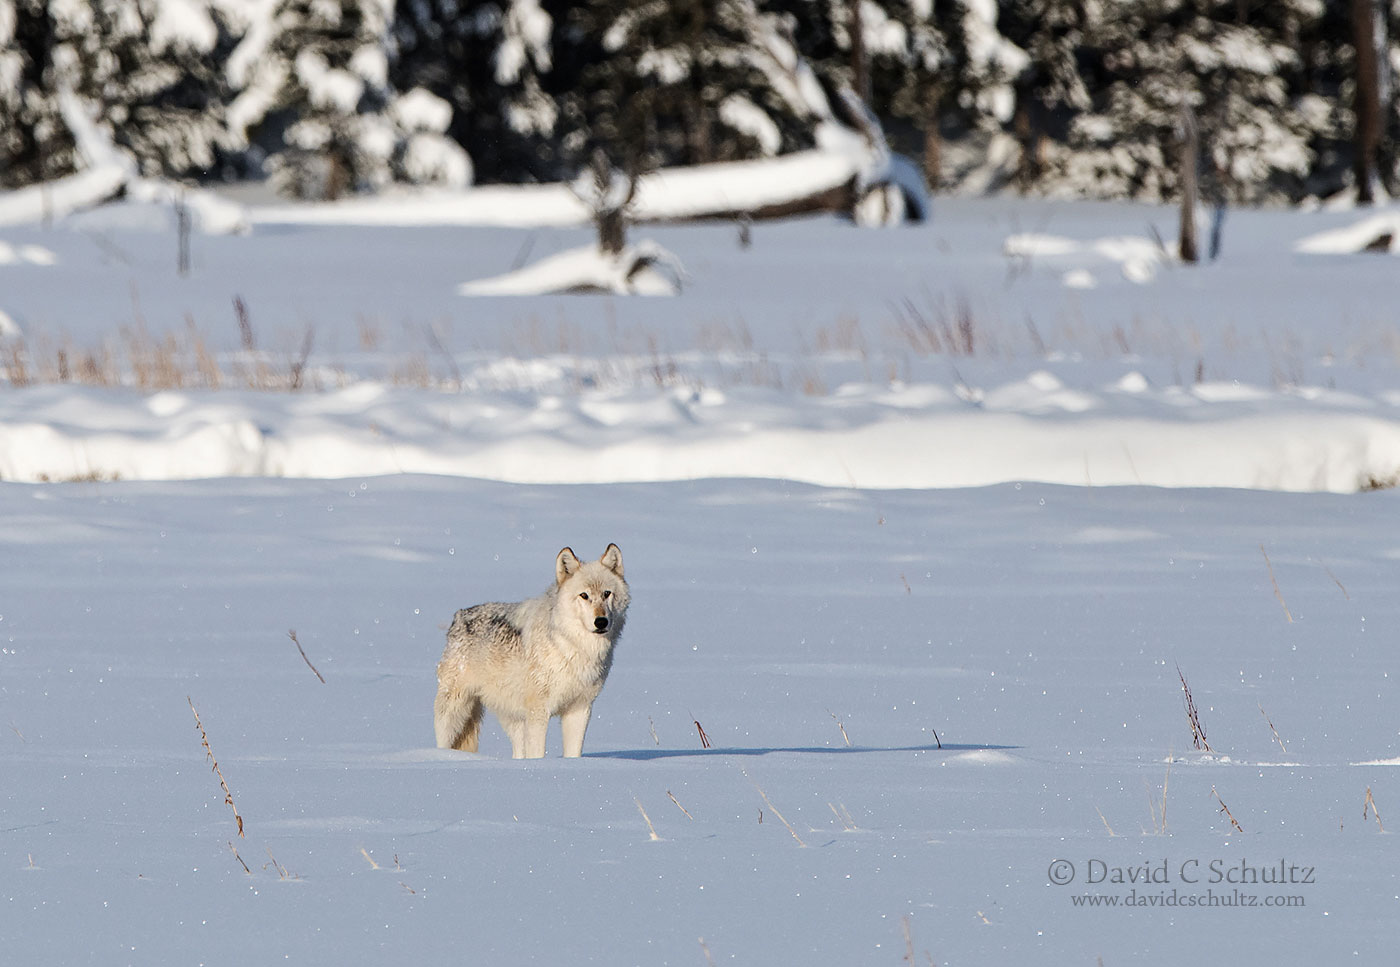 Wolf in Yellowstone - Image #161-6375